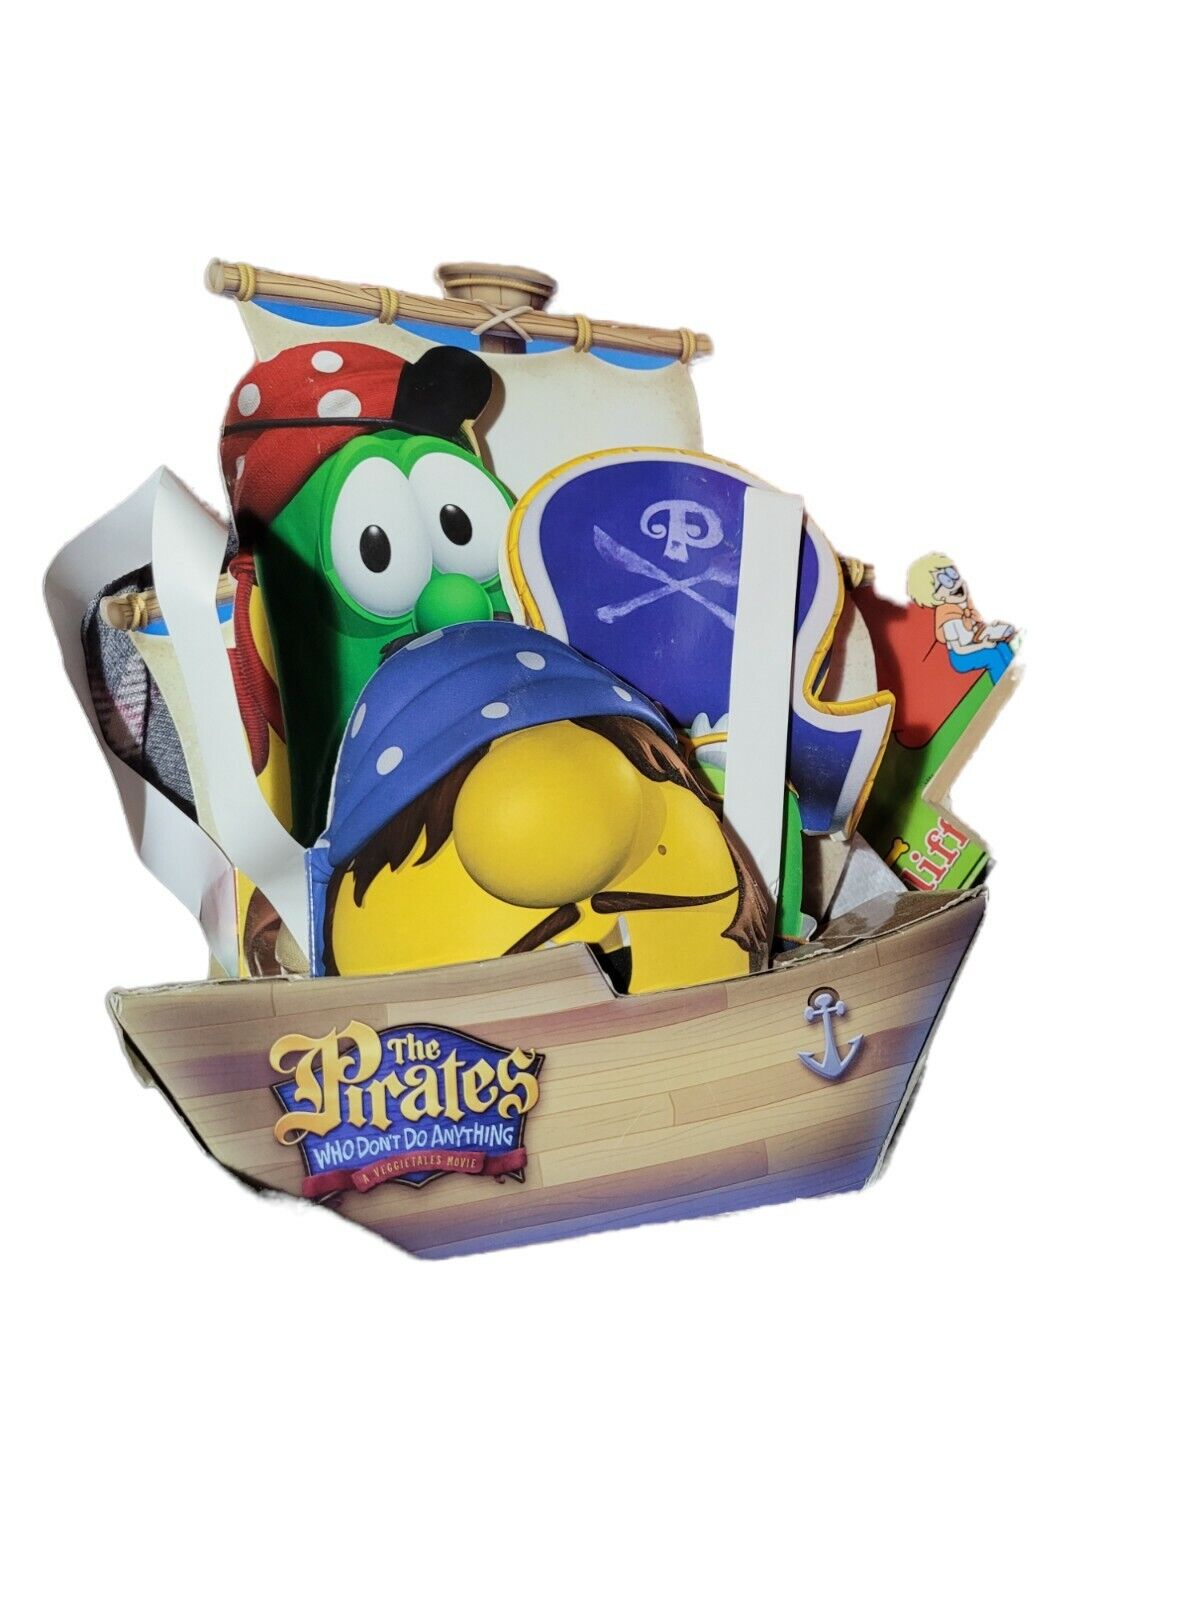 You are currently viewing VBS – Veggie Tales, The Pirates Who Don’t Do Anything